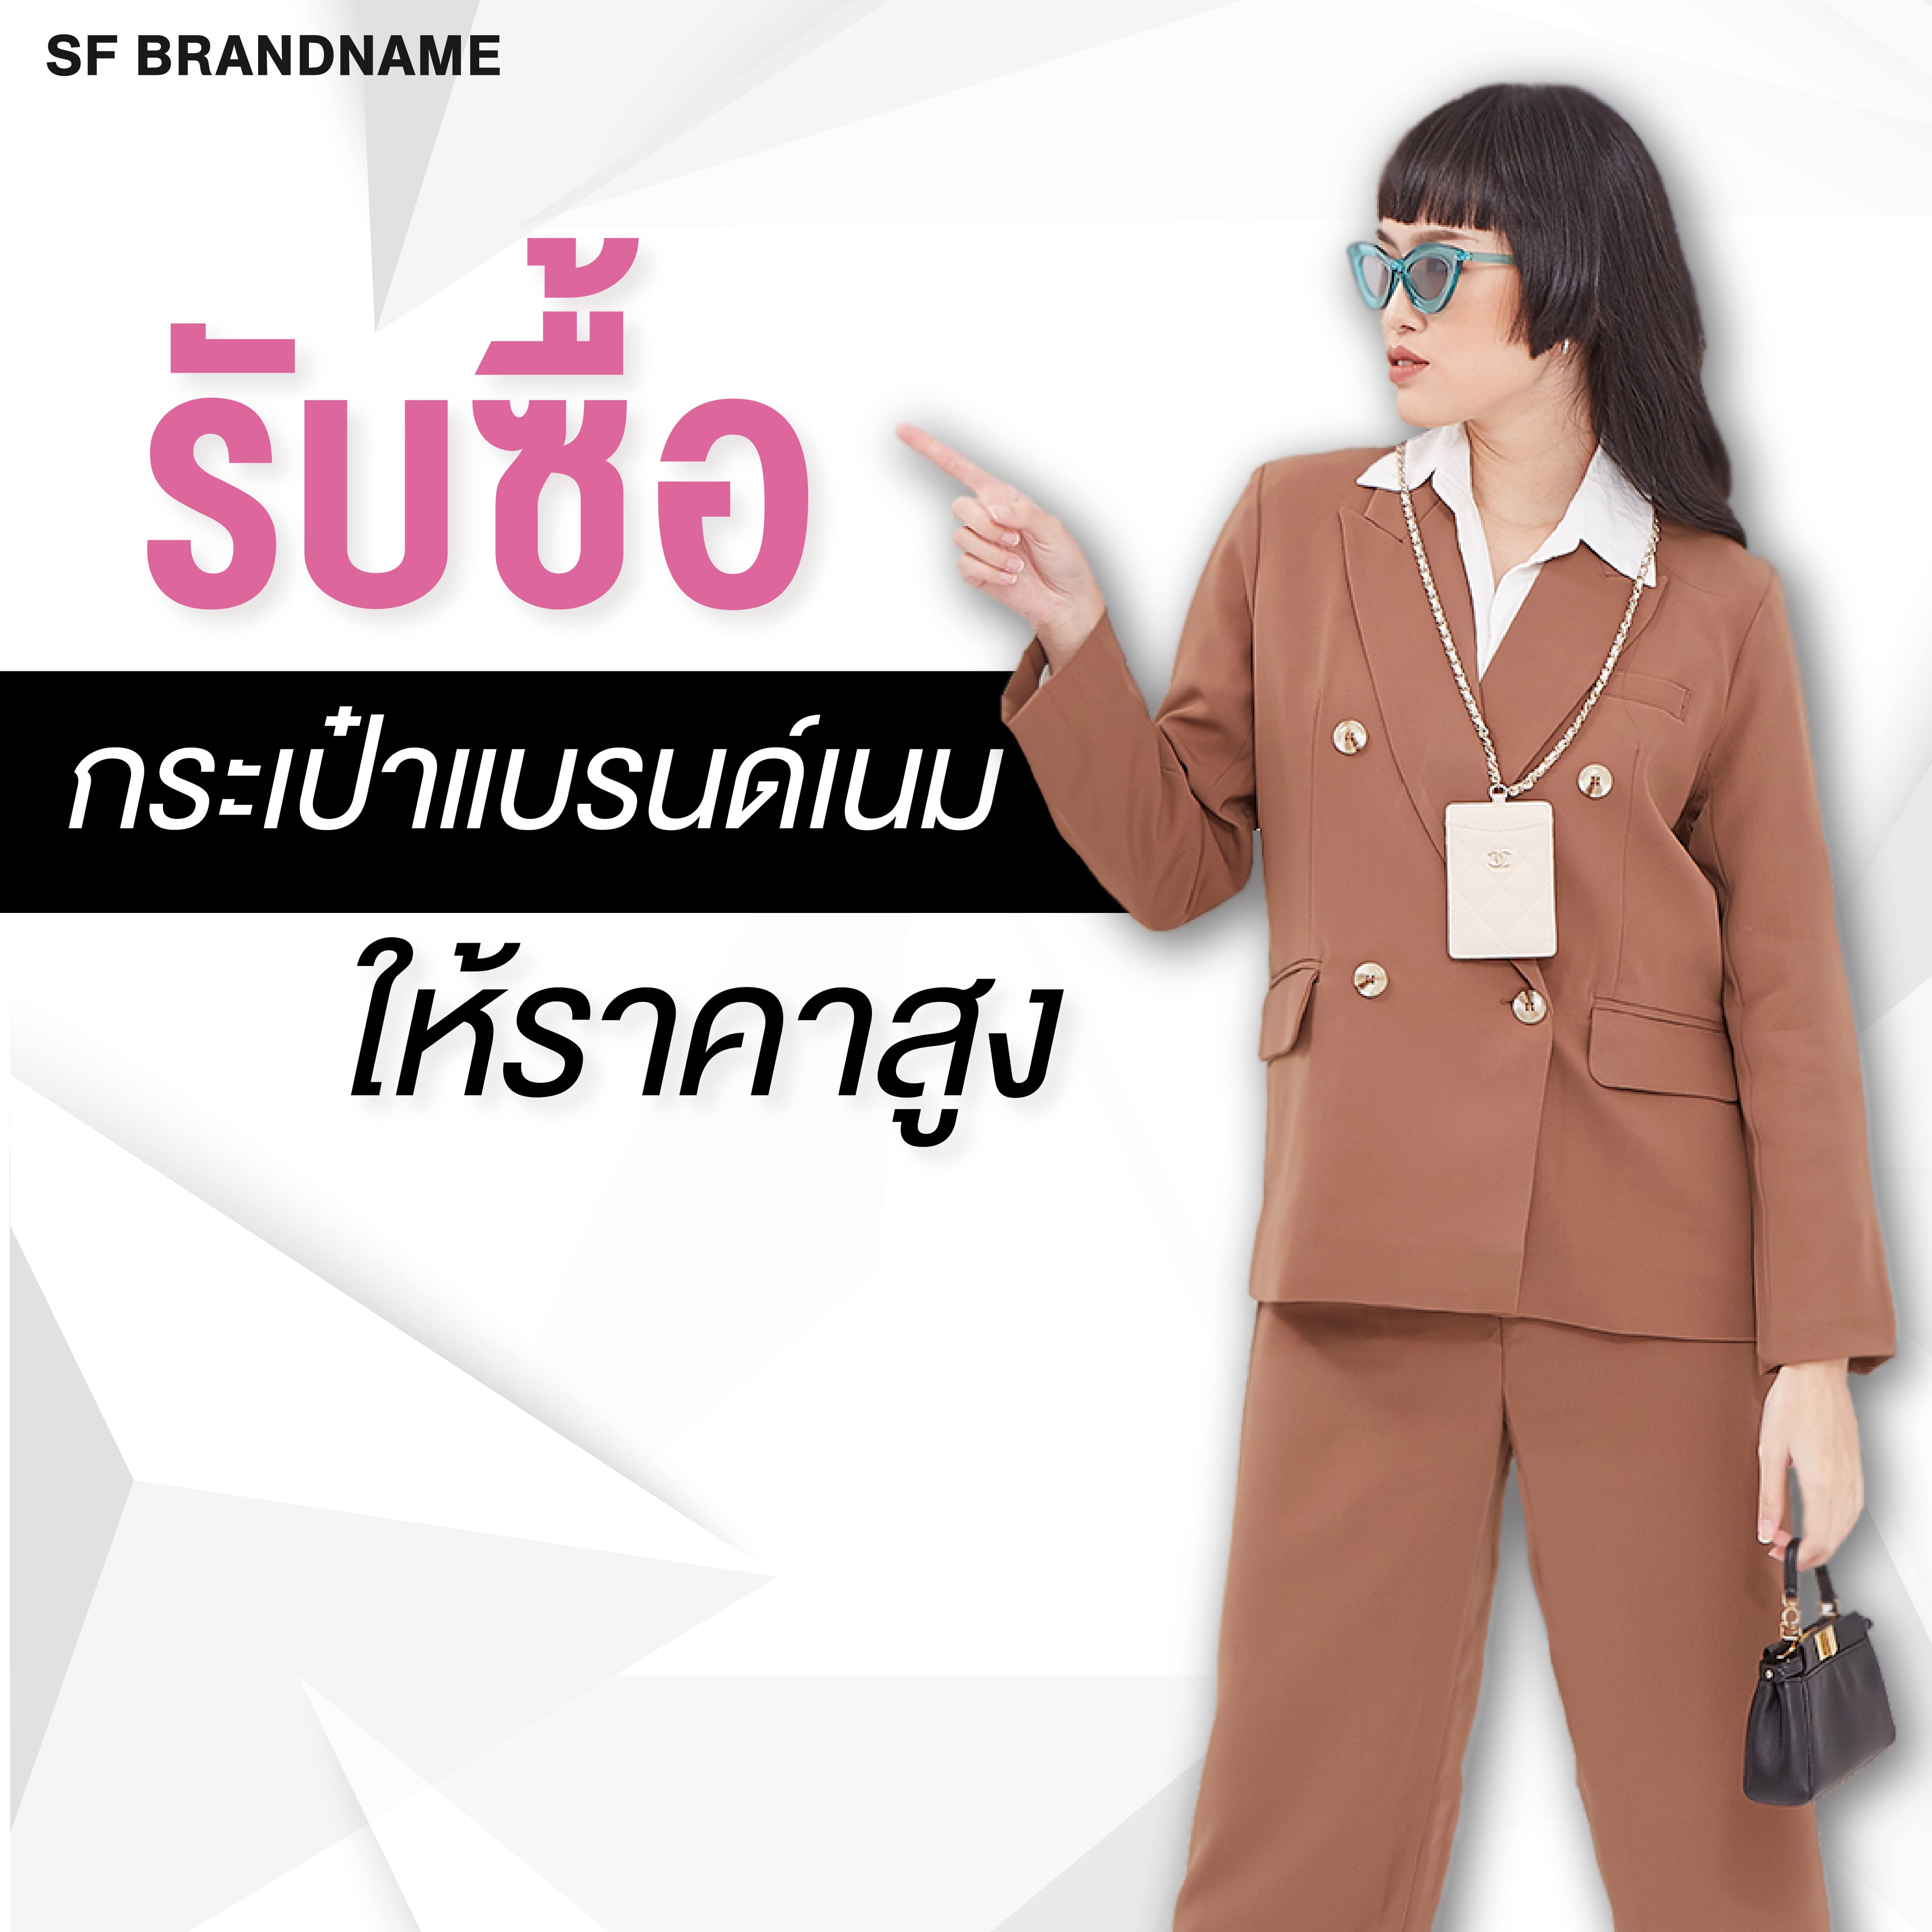 Enjoy the best selling experience by our expert of SF brandname